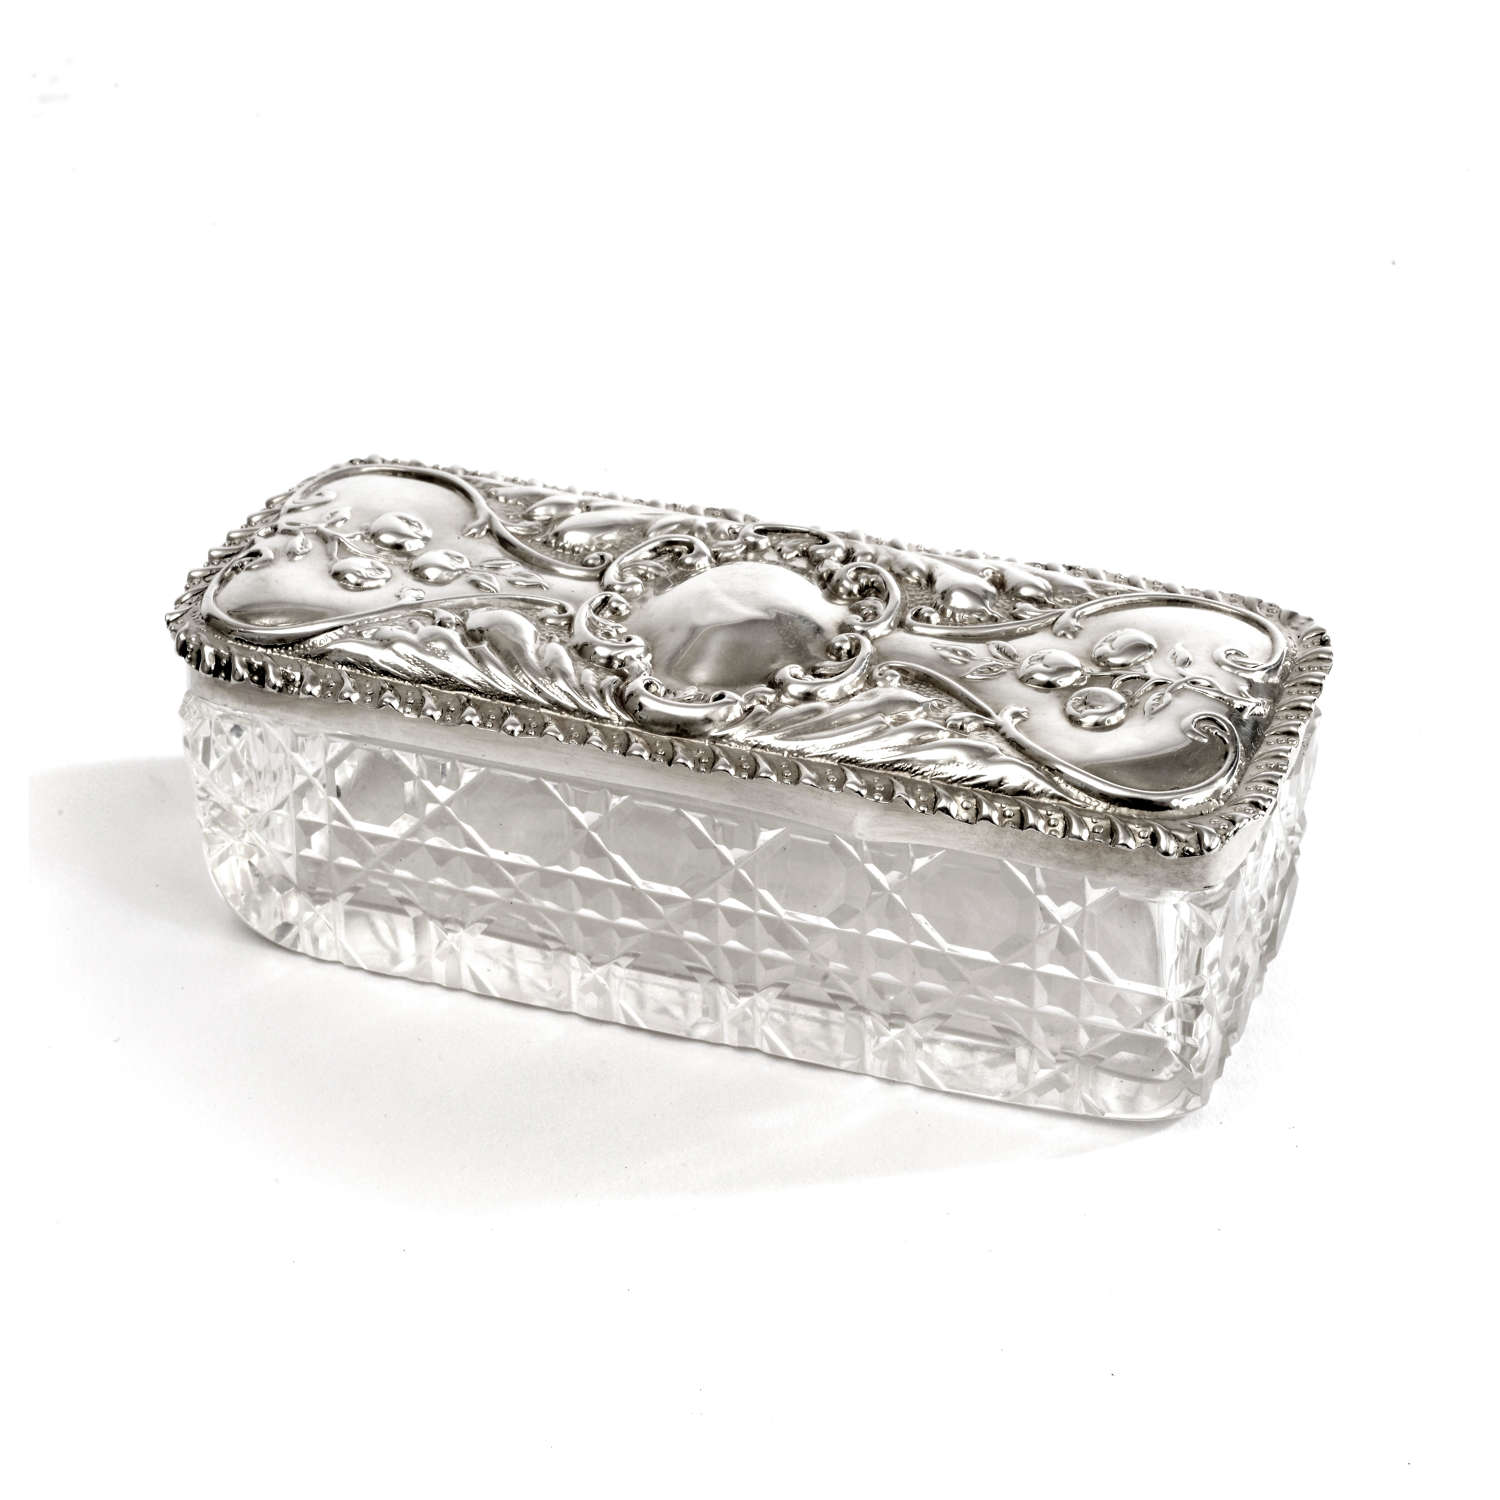 A Pretty Silver and Glass Trinket/Dressing Table Box